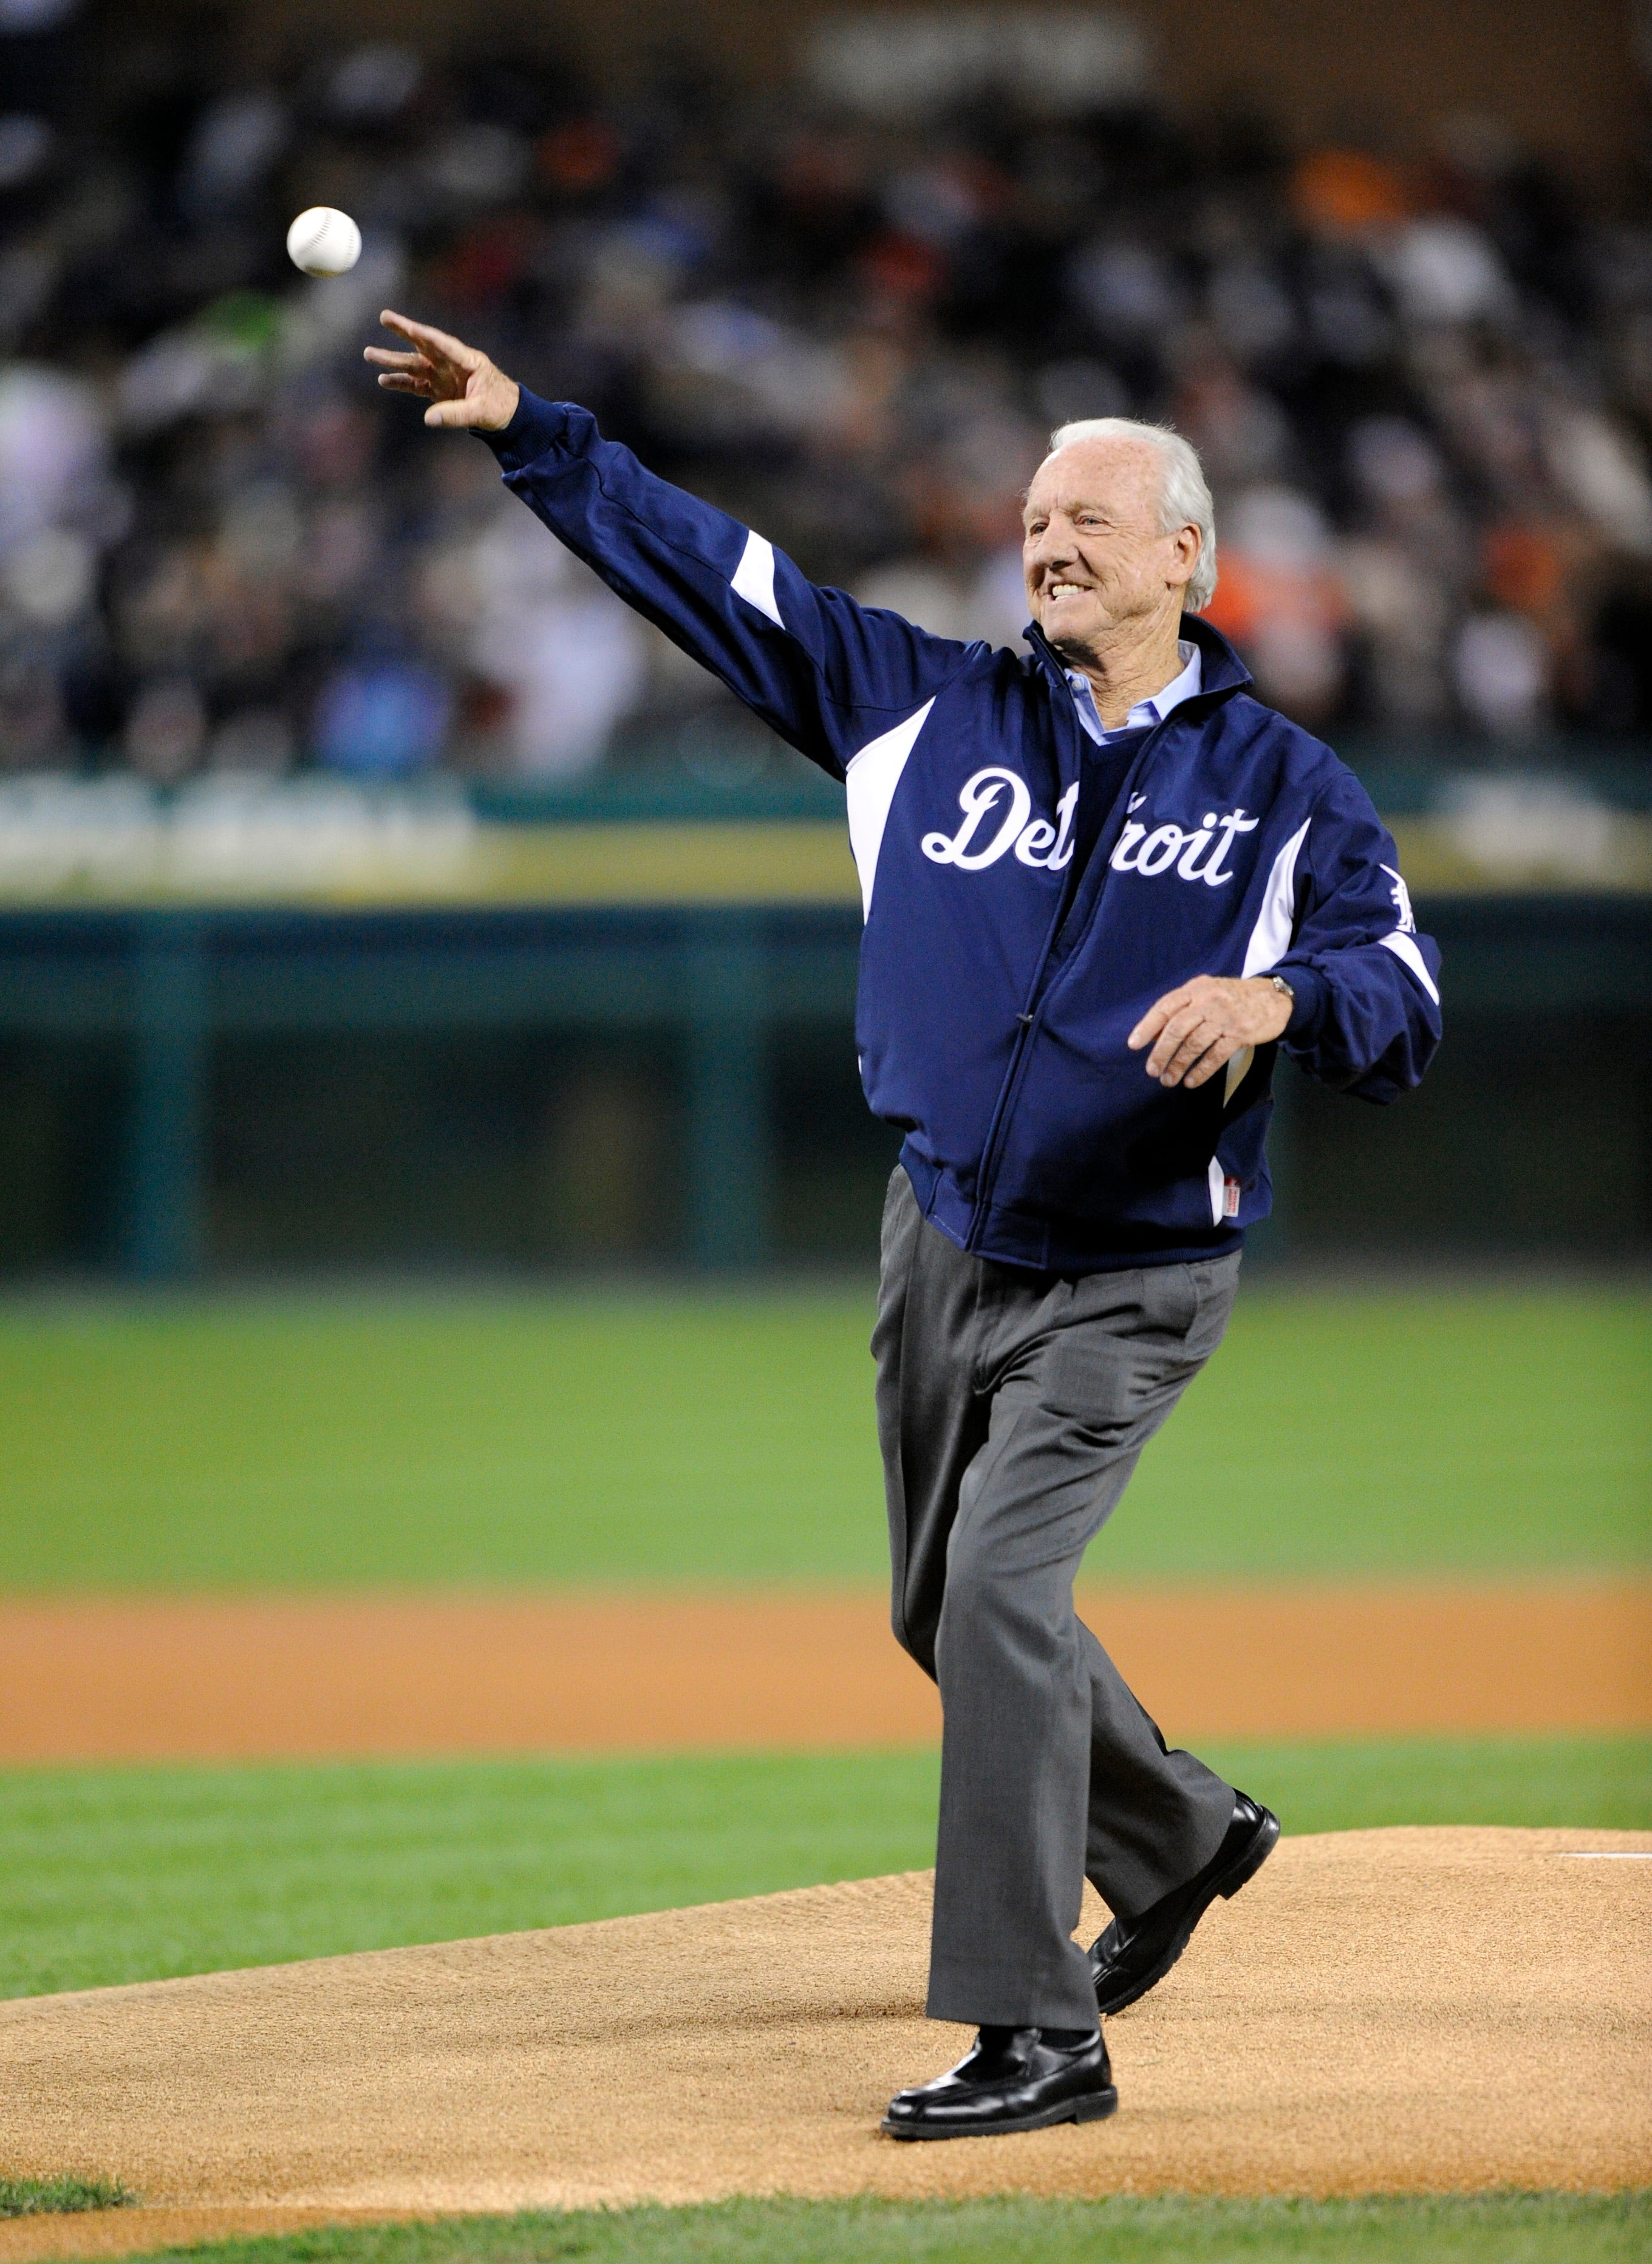 Detroit Tigers legend Al Kaline throws out the first pitch before game three of the World Series against the San Francisco Giants at Comerica Park in Detroit, October 27, 2012.